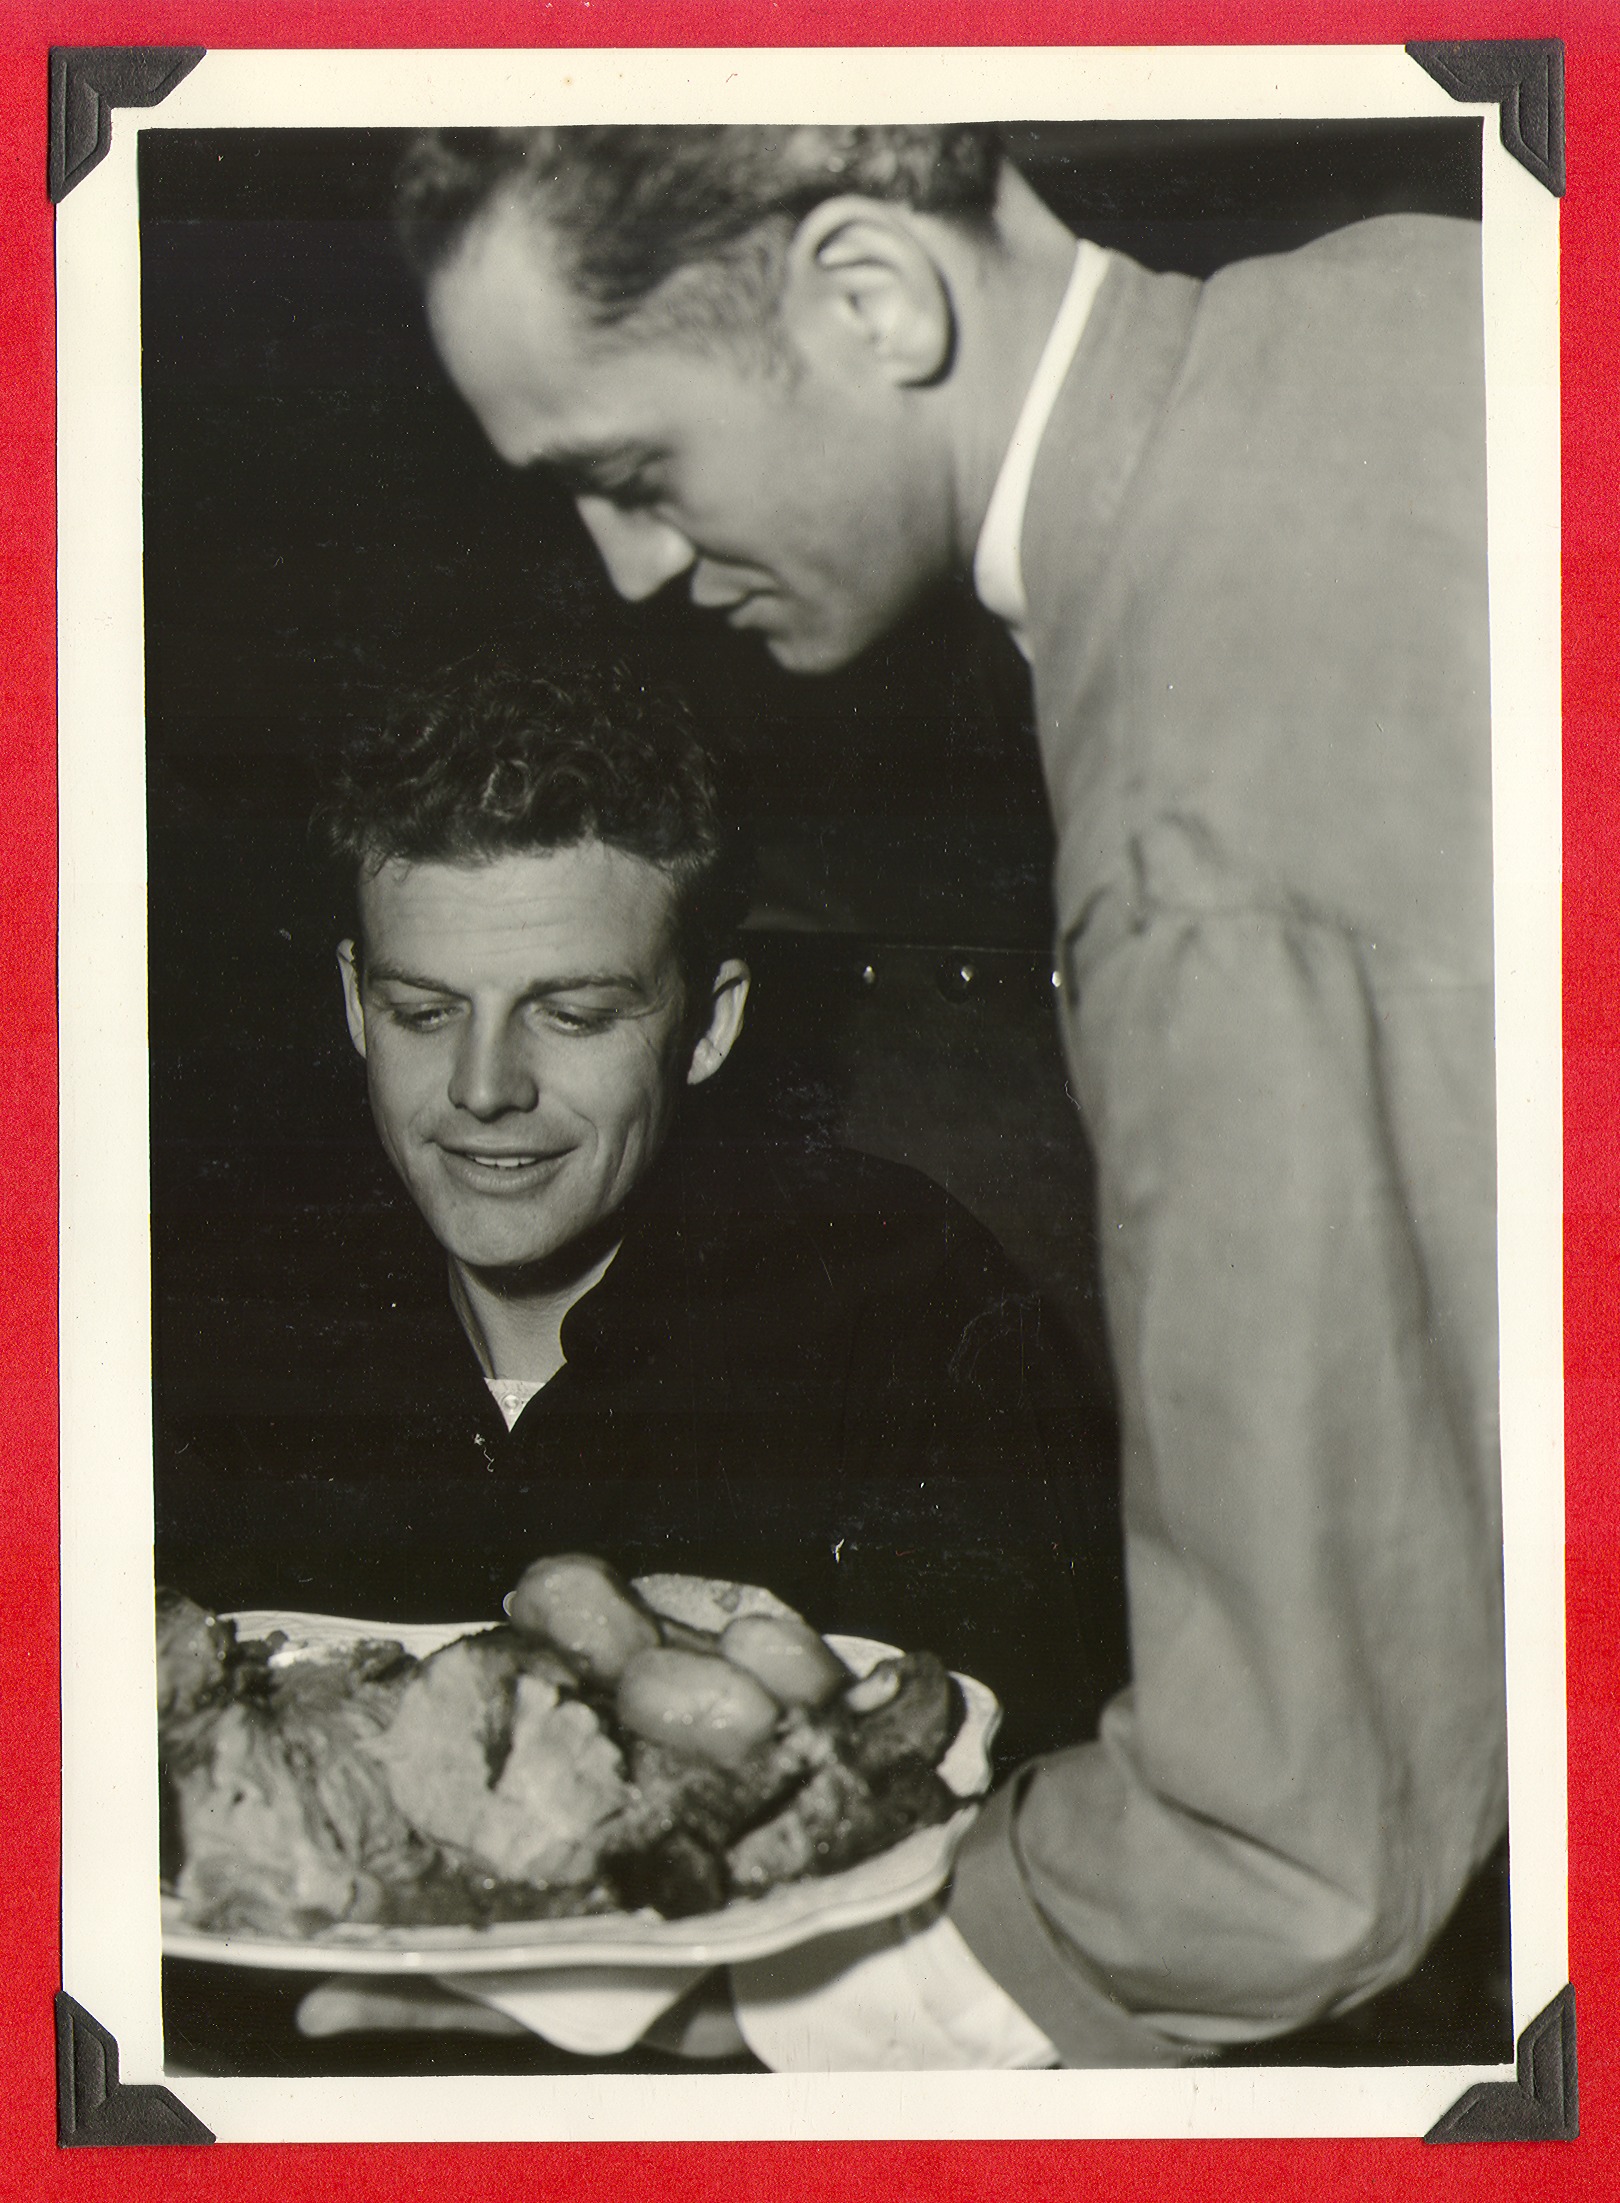 Rex Bell being served dinner by a waiter, Richard- at the ranch: photographic print